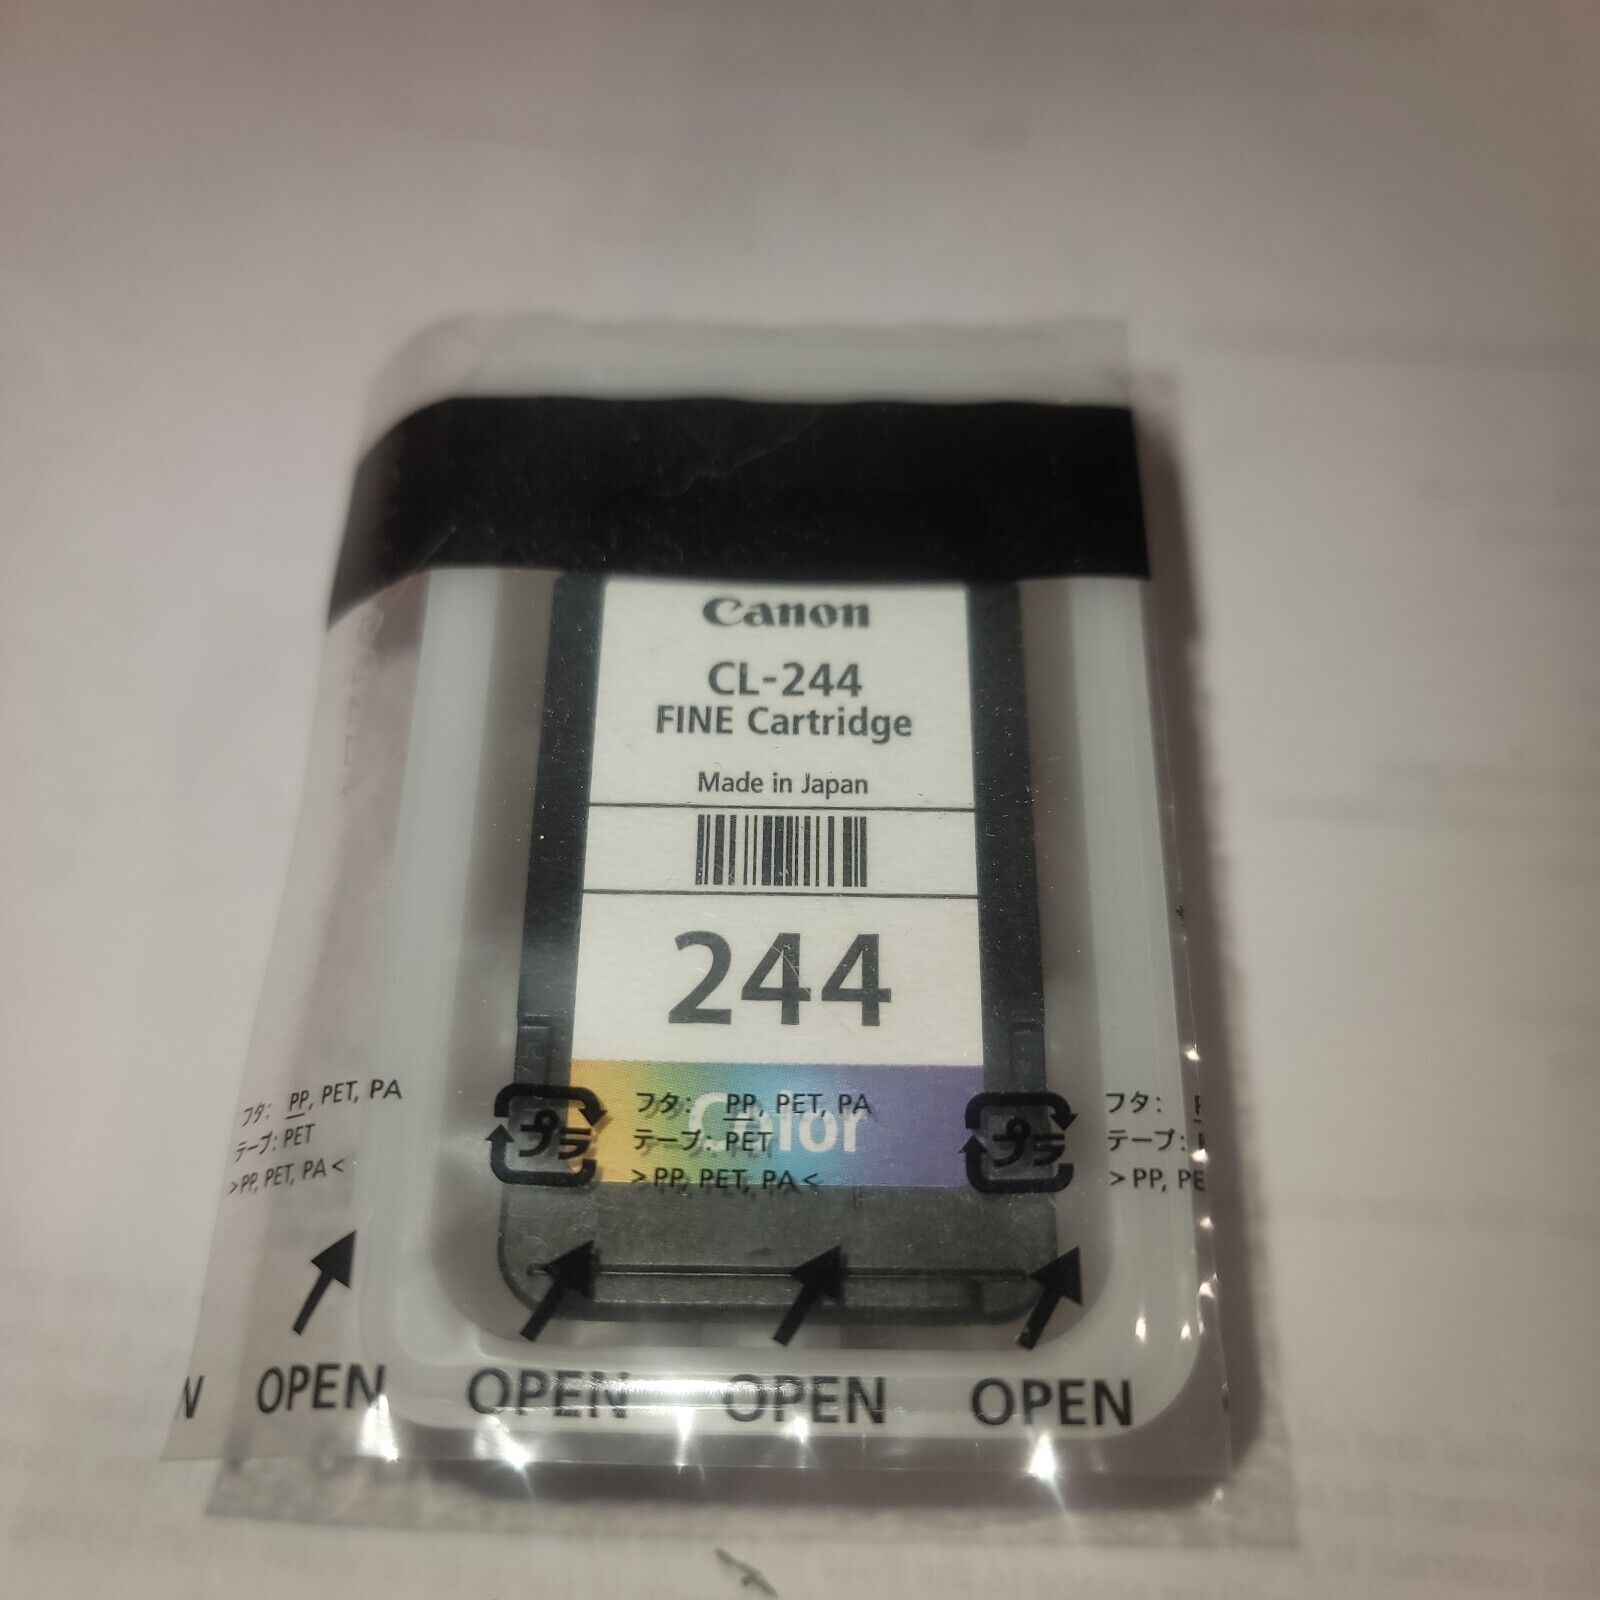 New Sealed, No Box, Genuine Canon CL-244 Ink Color Cartridge, 